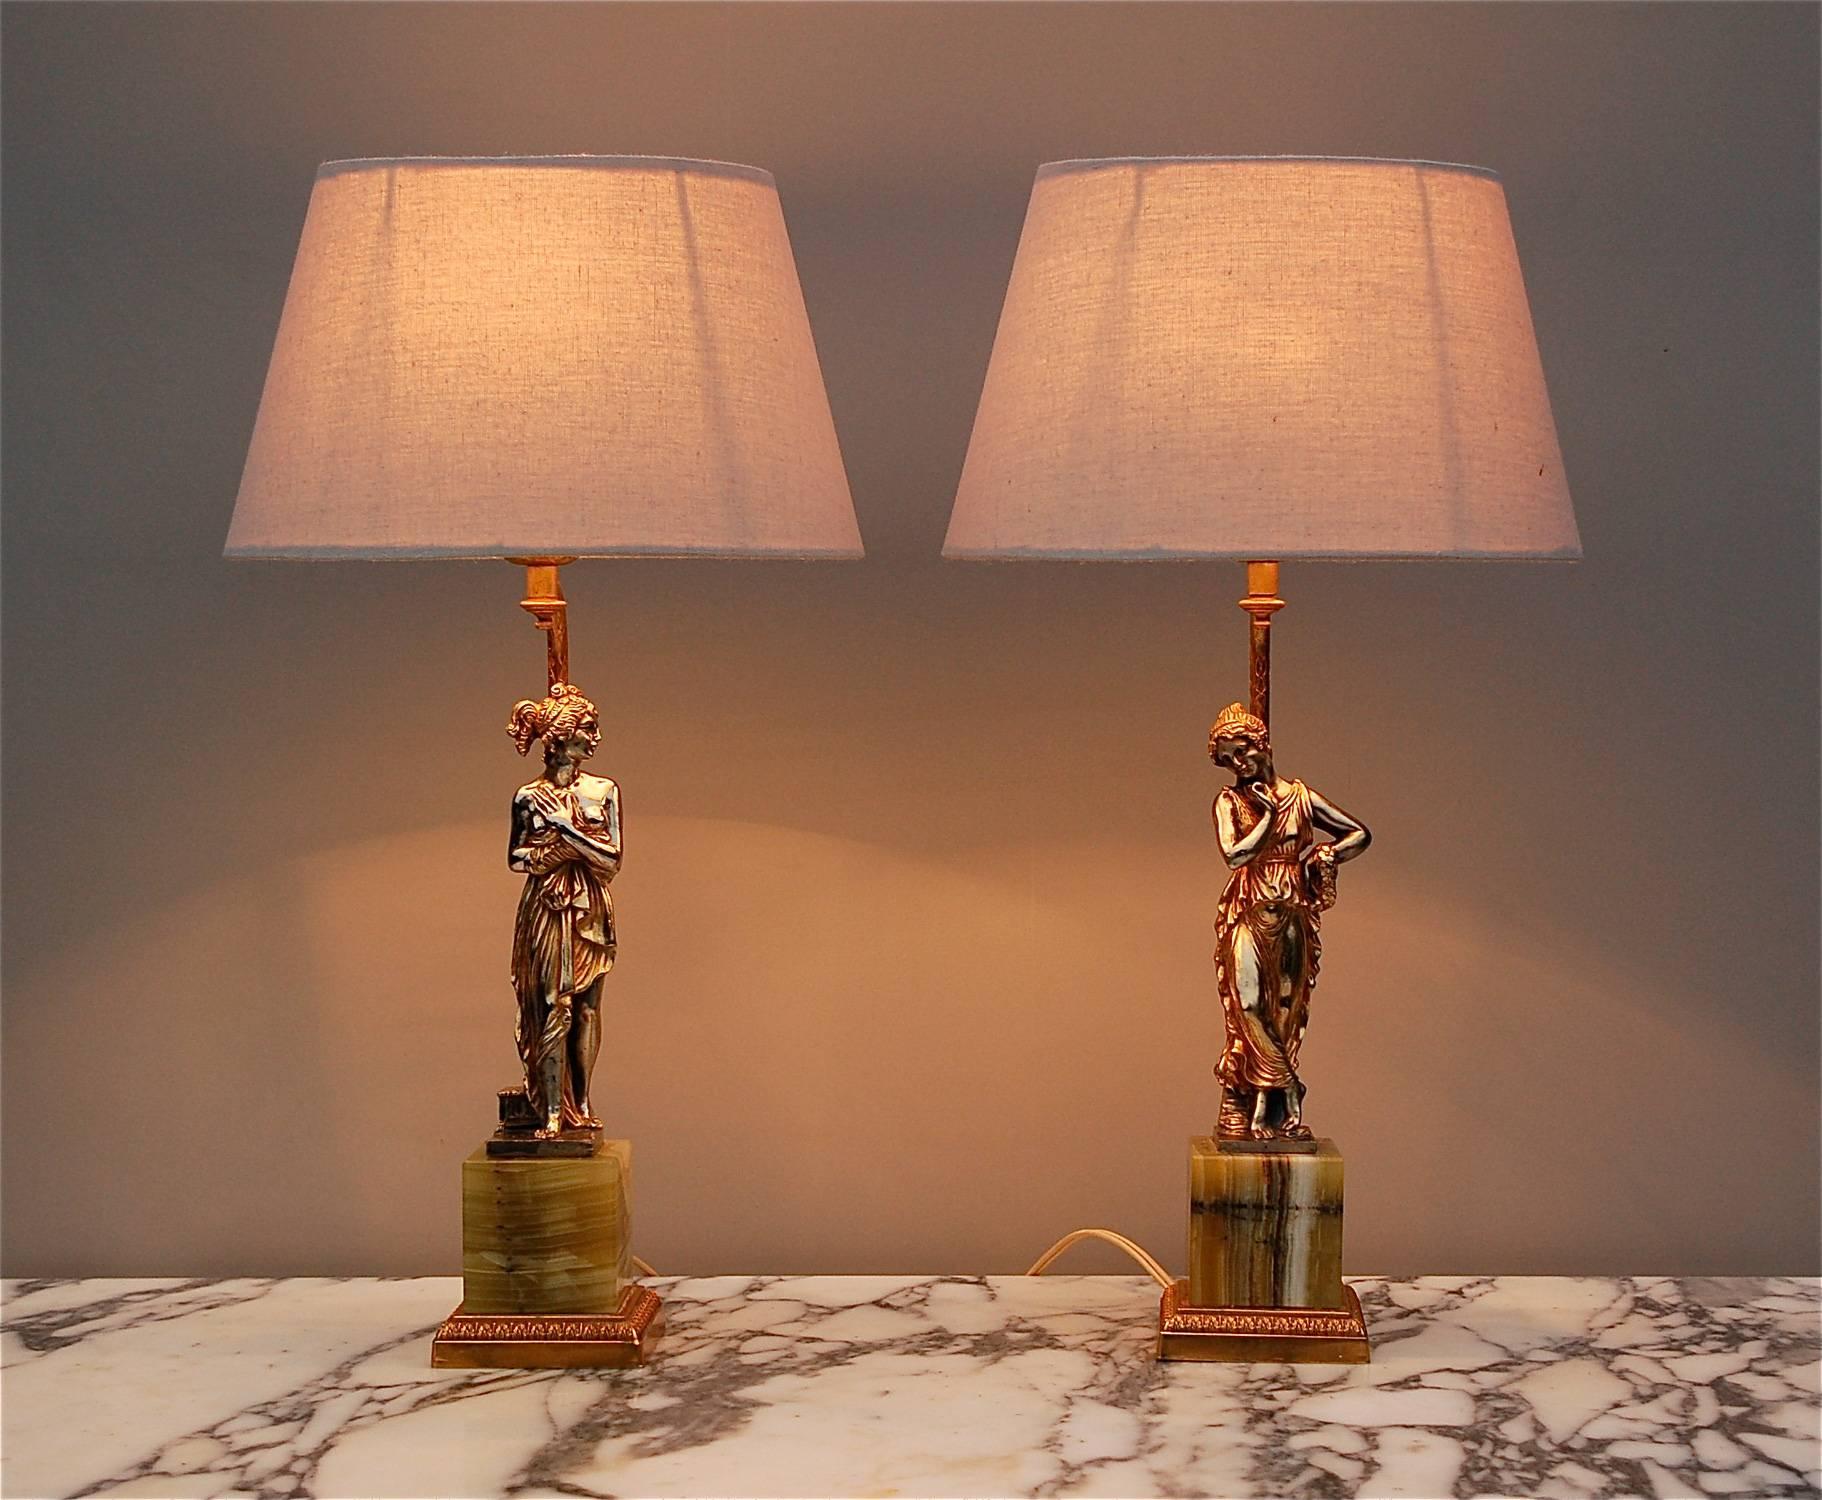 A pair of heavy Italian table lamps with striped onyx base resting on a gold colored brass platform, decorated with a neoclassical motif. A delicately proportioned statue of Roman lady in a draped tunica forms the central focal point of the lamps.